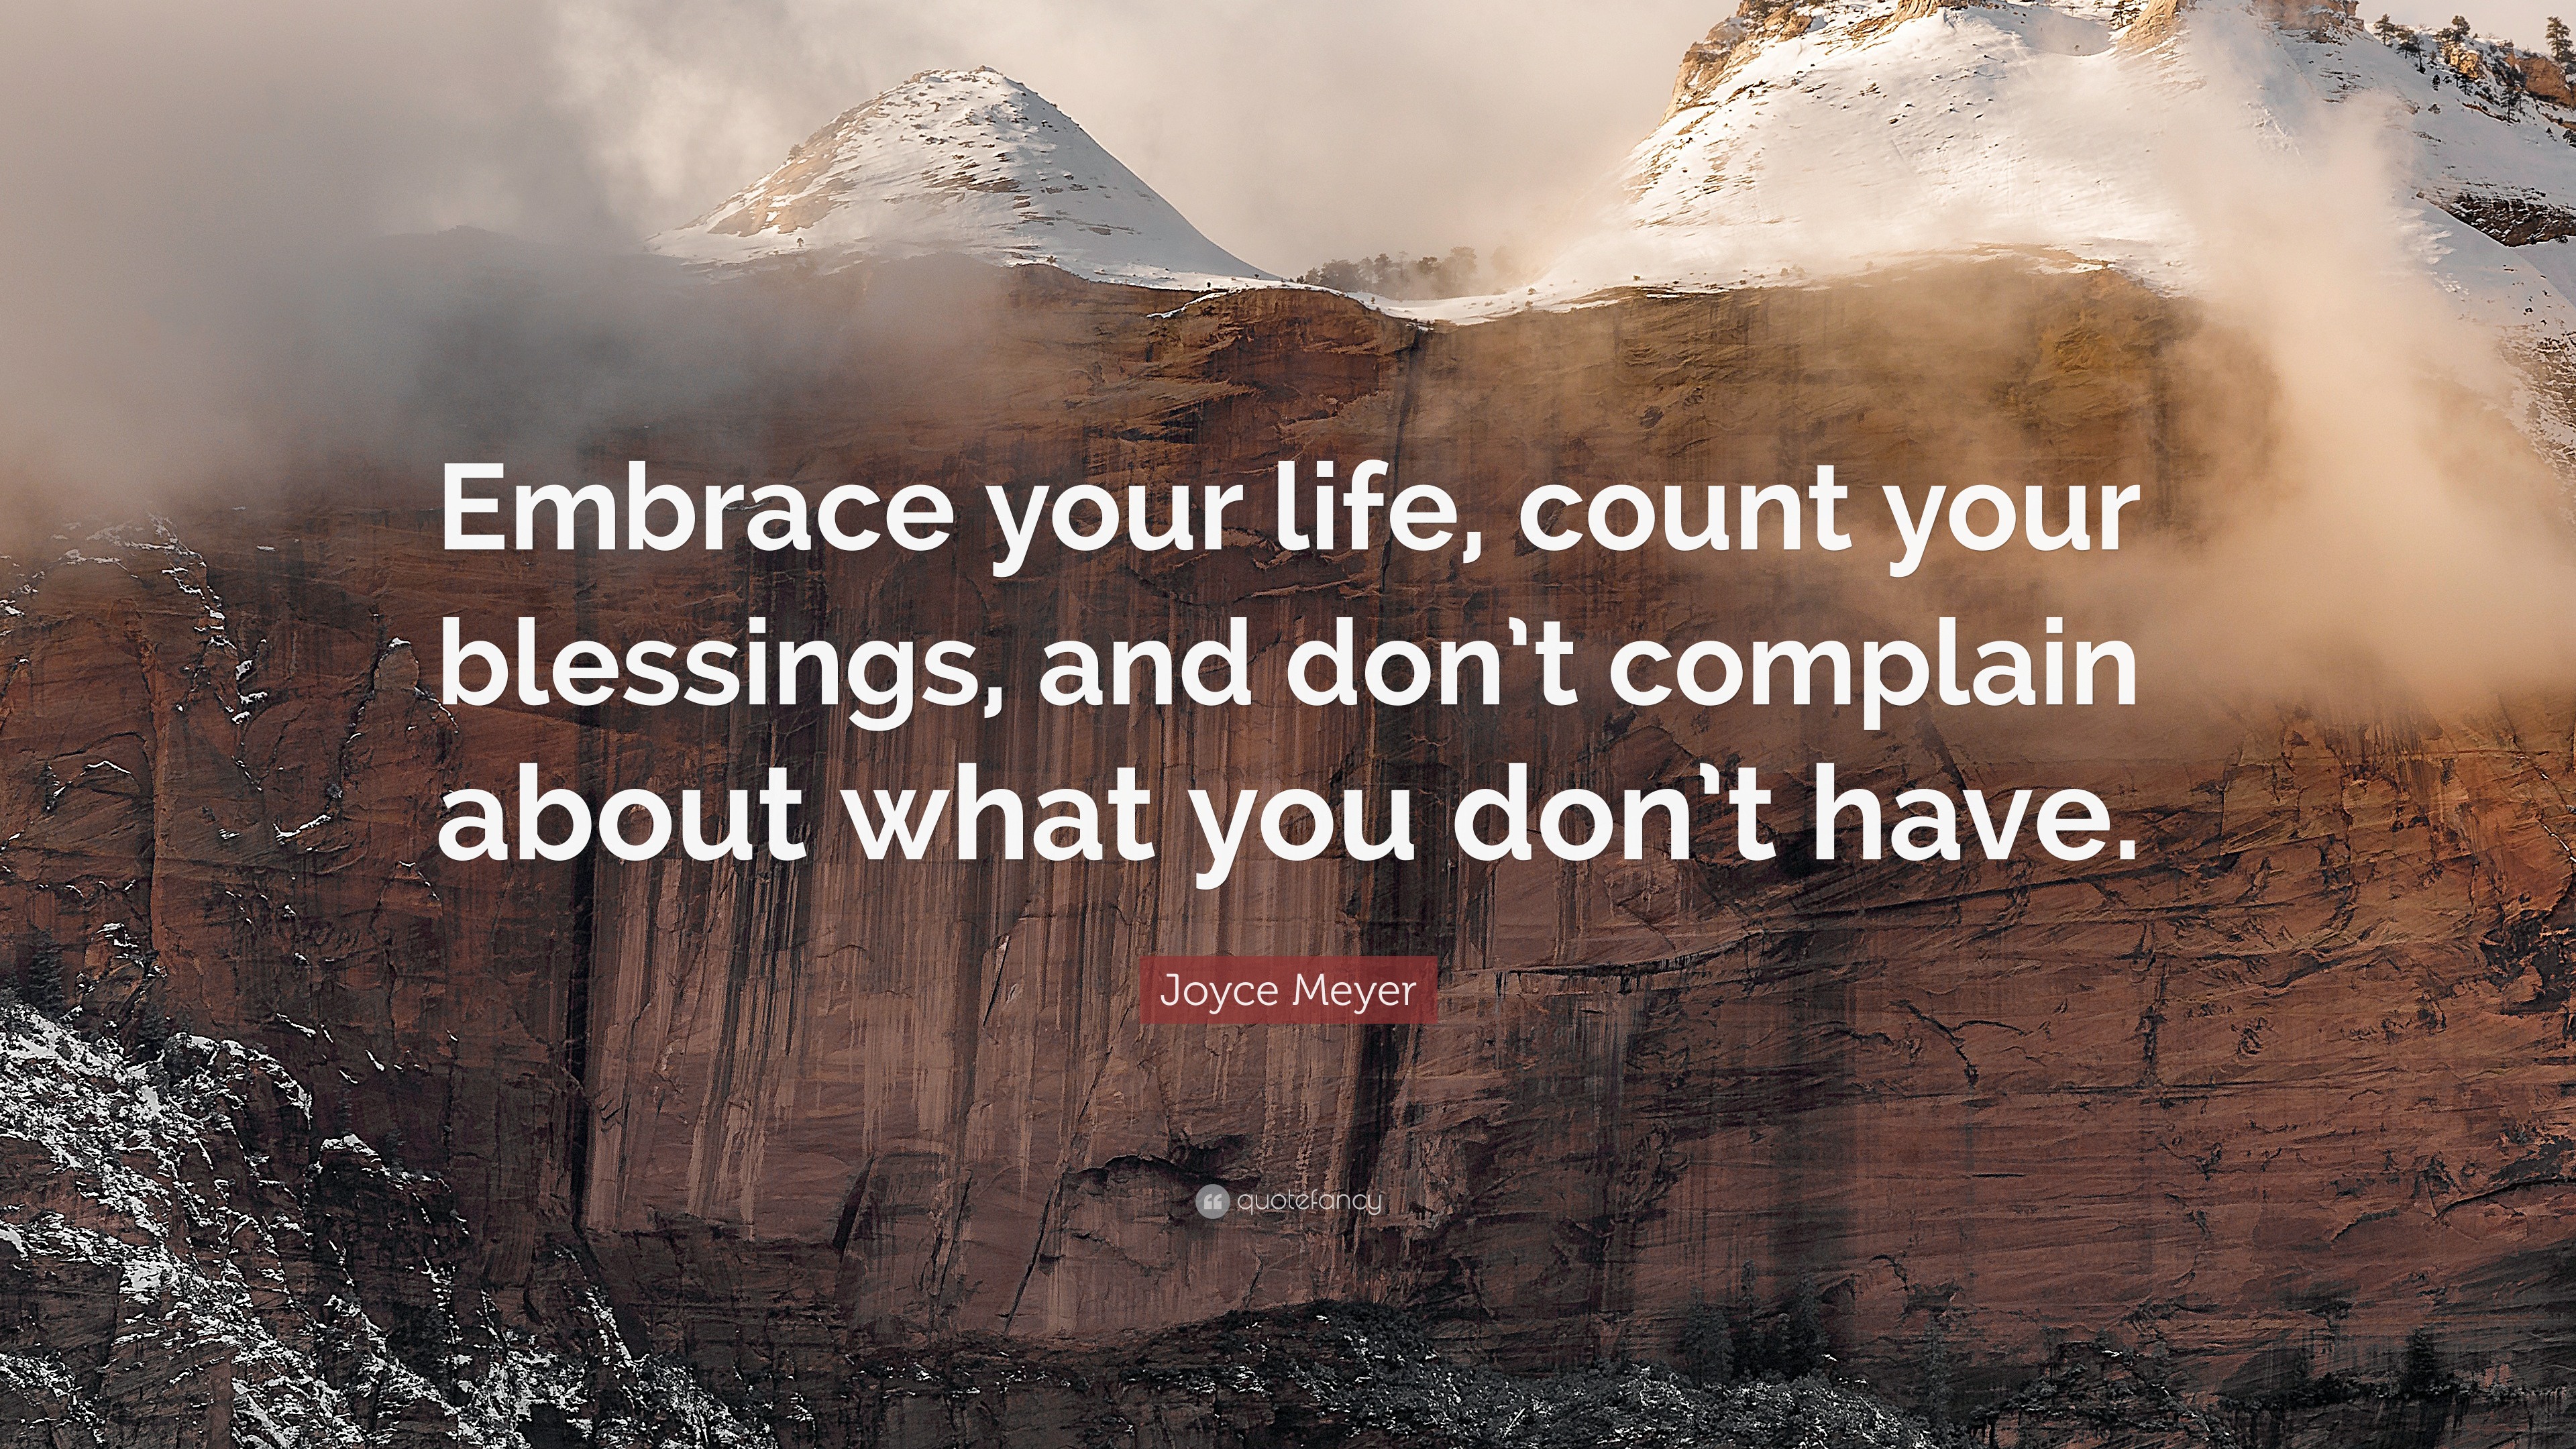 Joyce Meyer Quote: “Embrace your life, count your blessings, and don’t